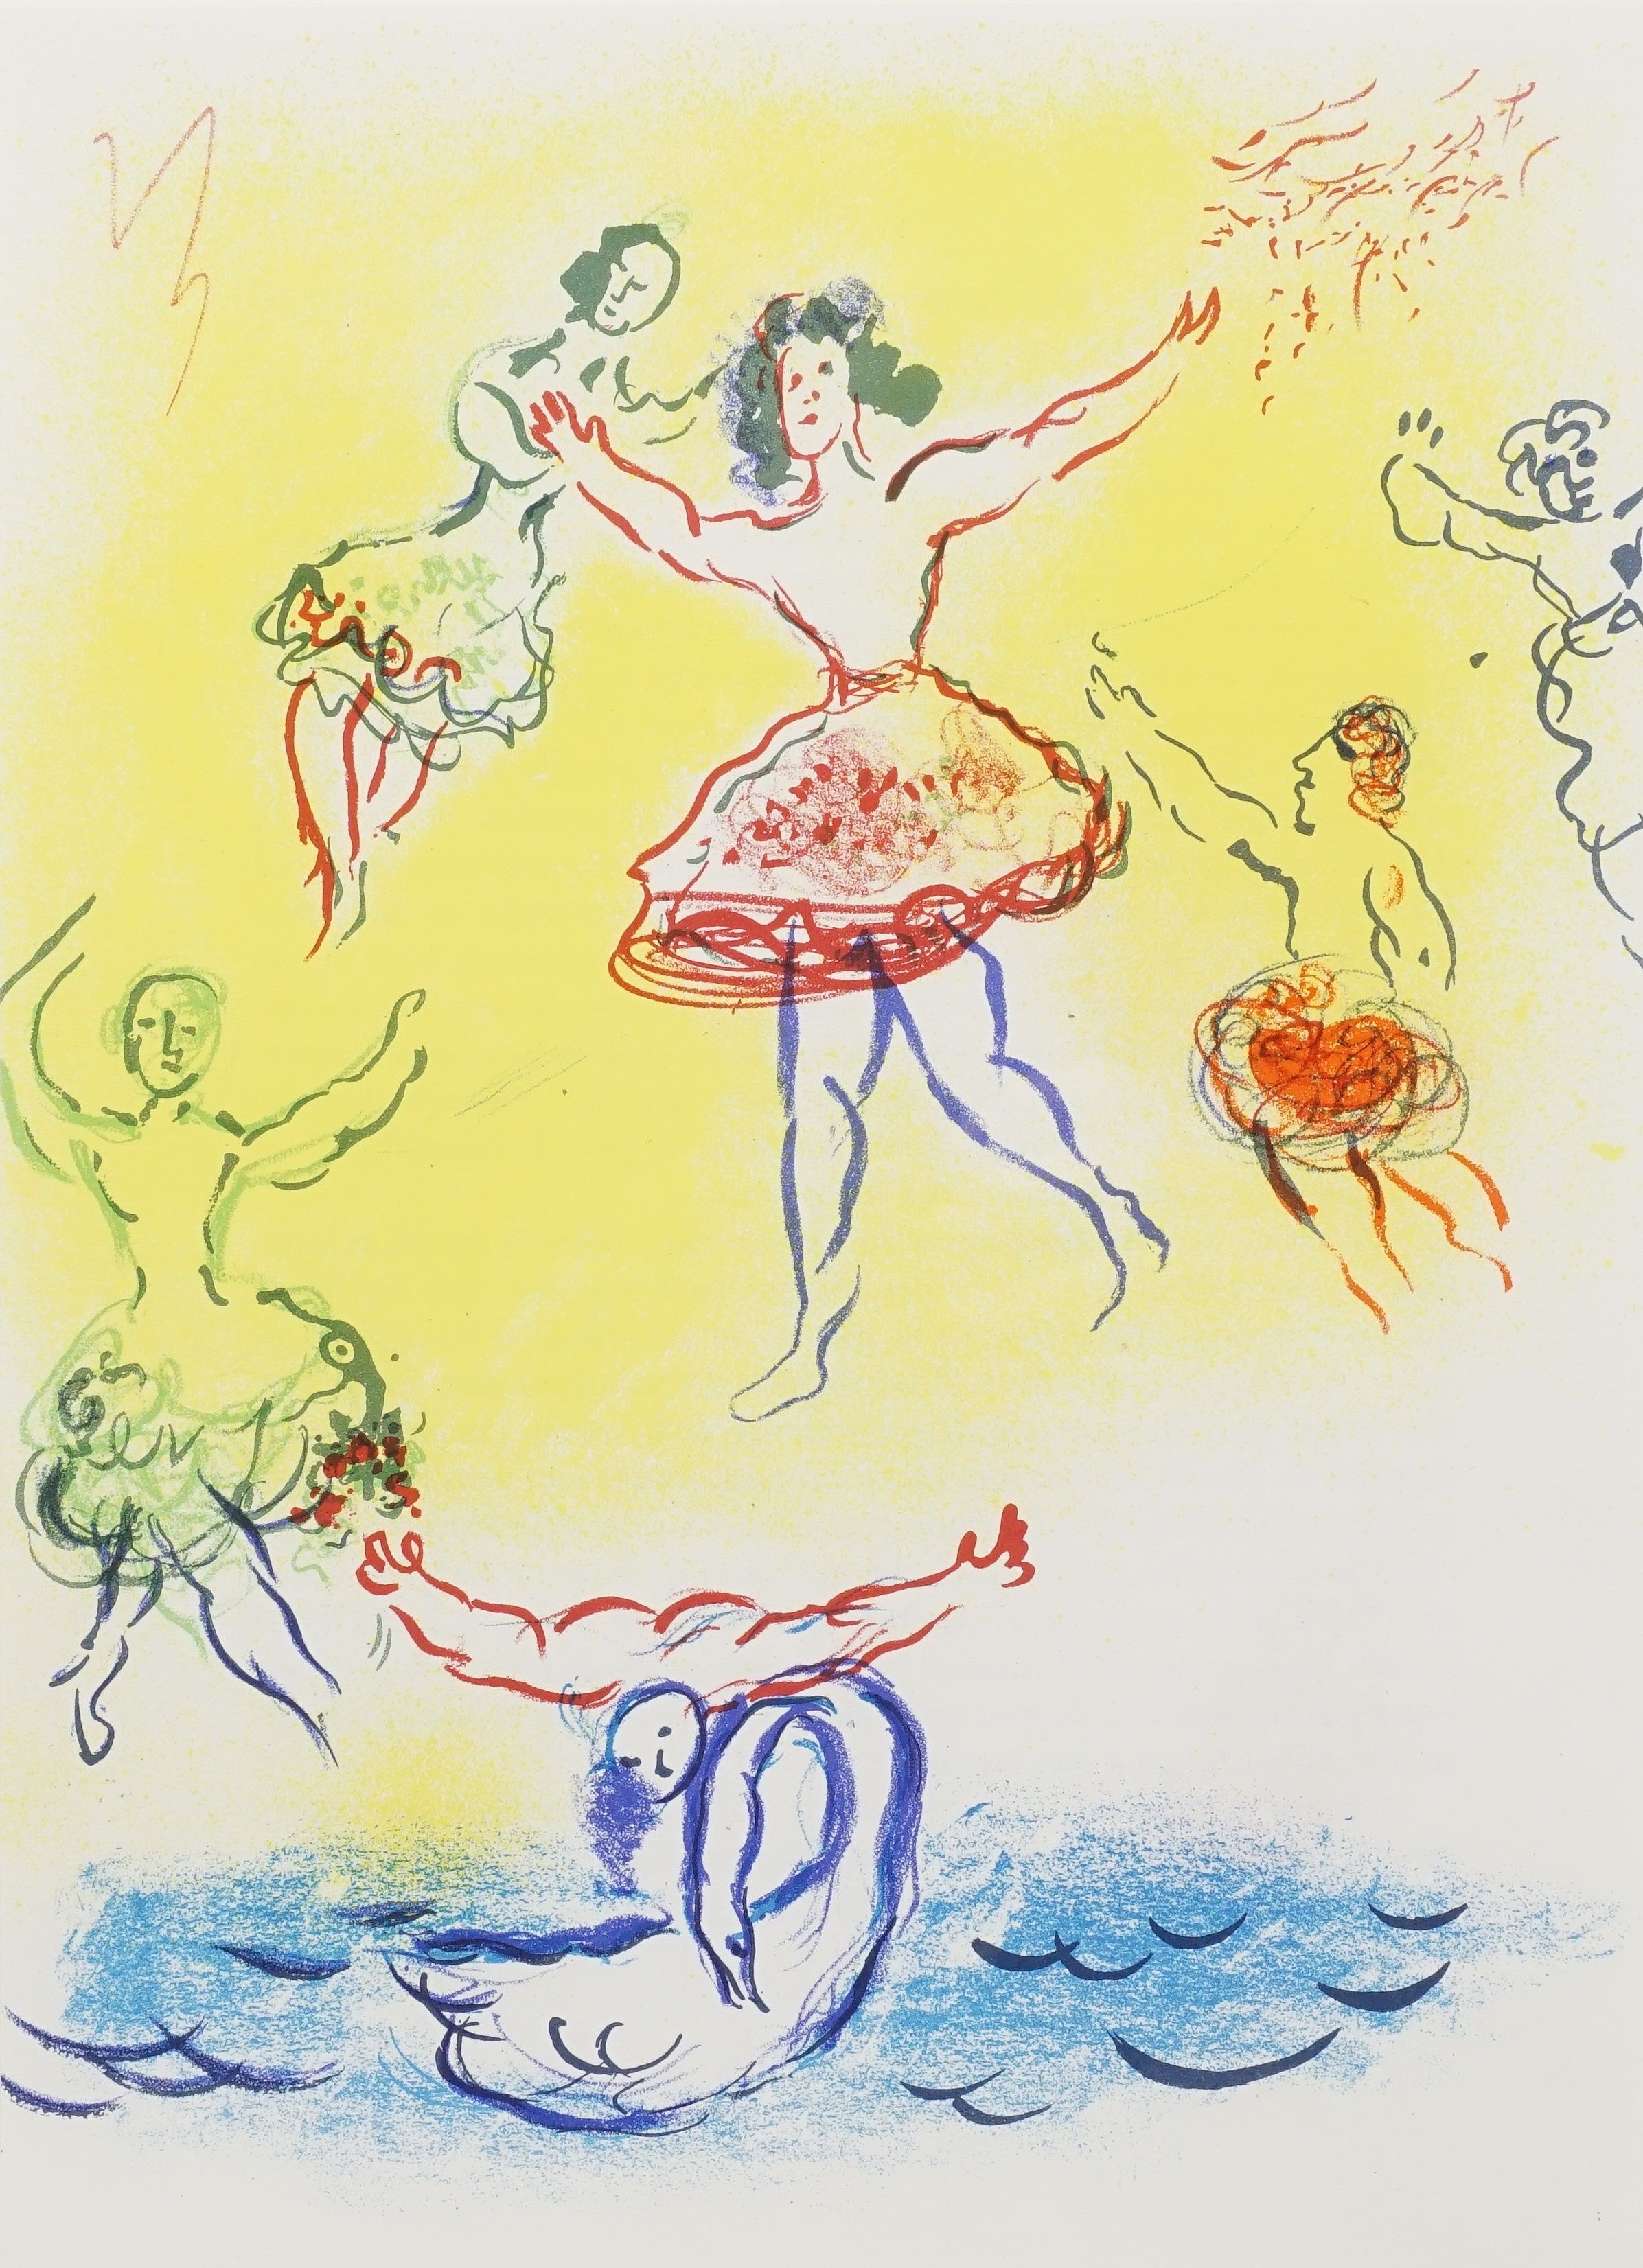 Swan Lake by Marc Chagall, 1965